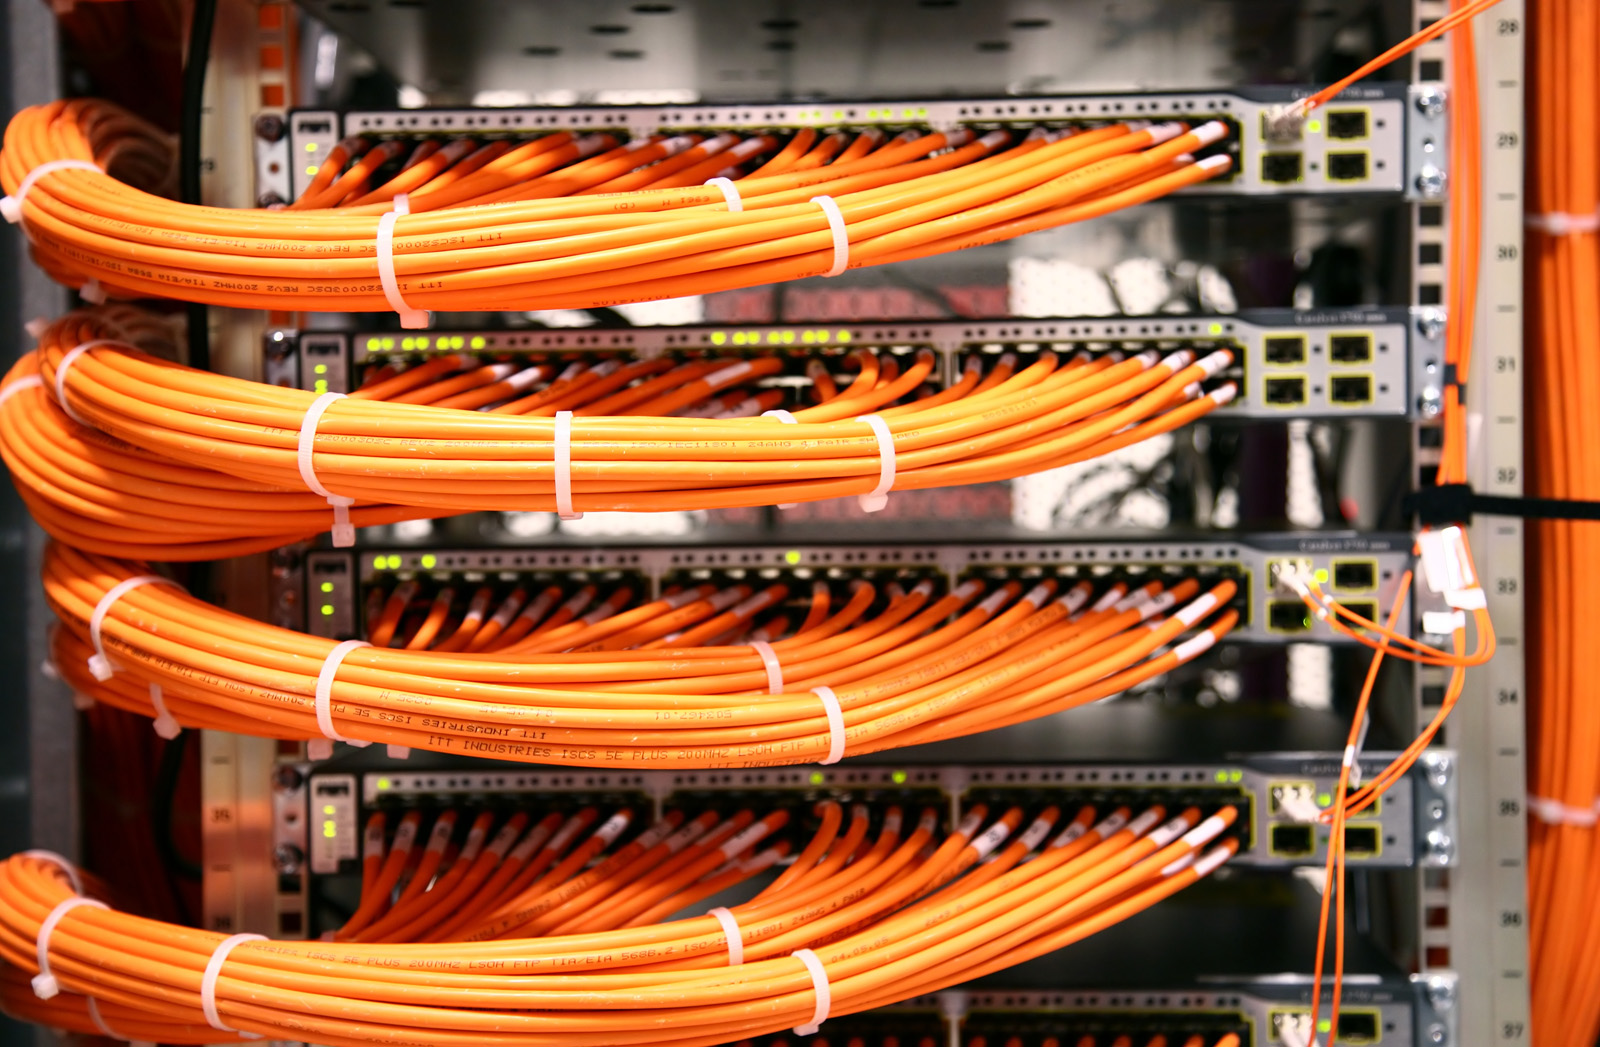 Pewee Valley Kentucky Premier Voice & Data Network Cabling Provider